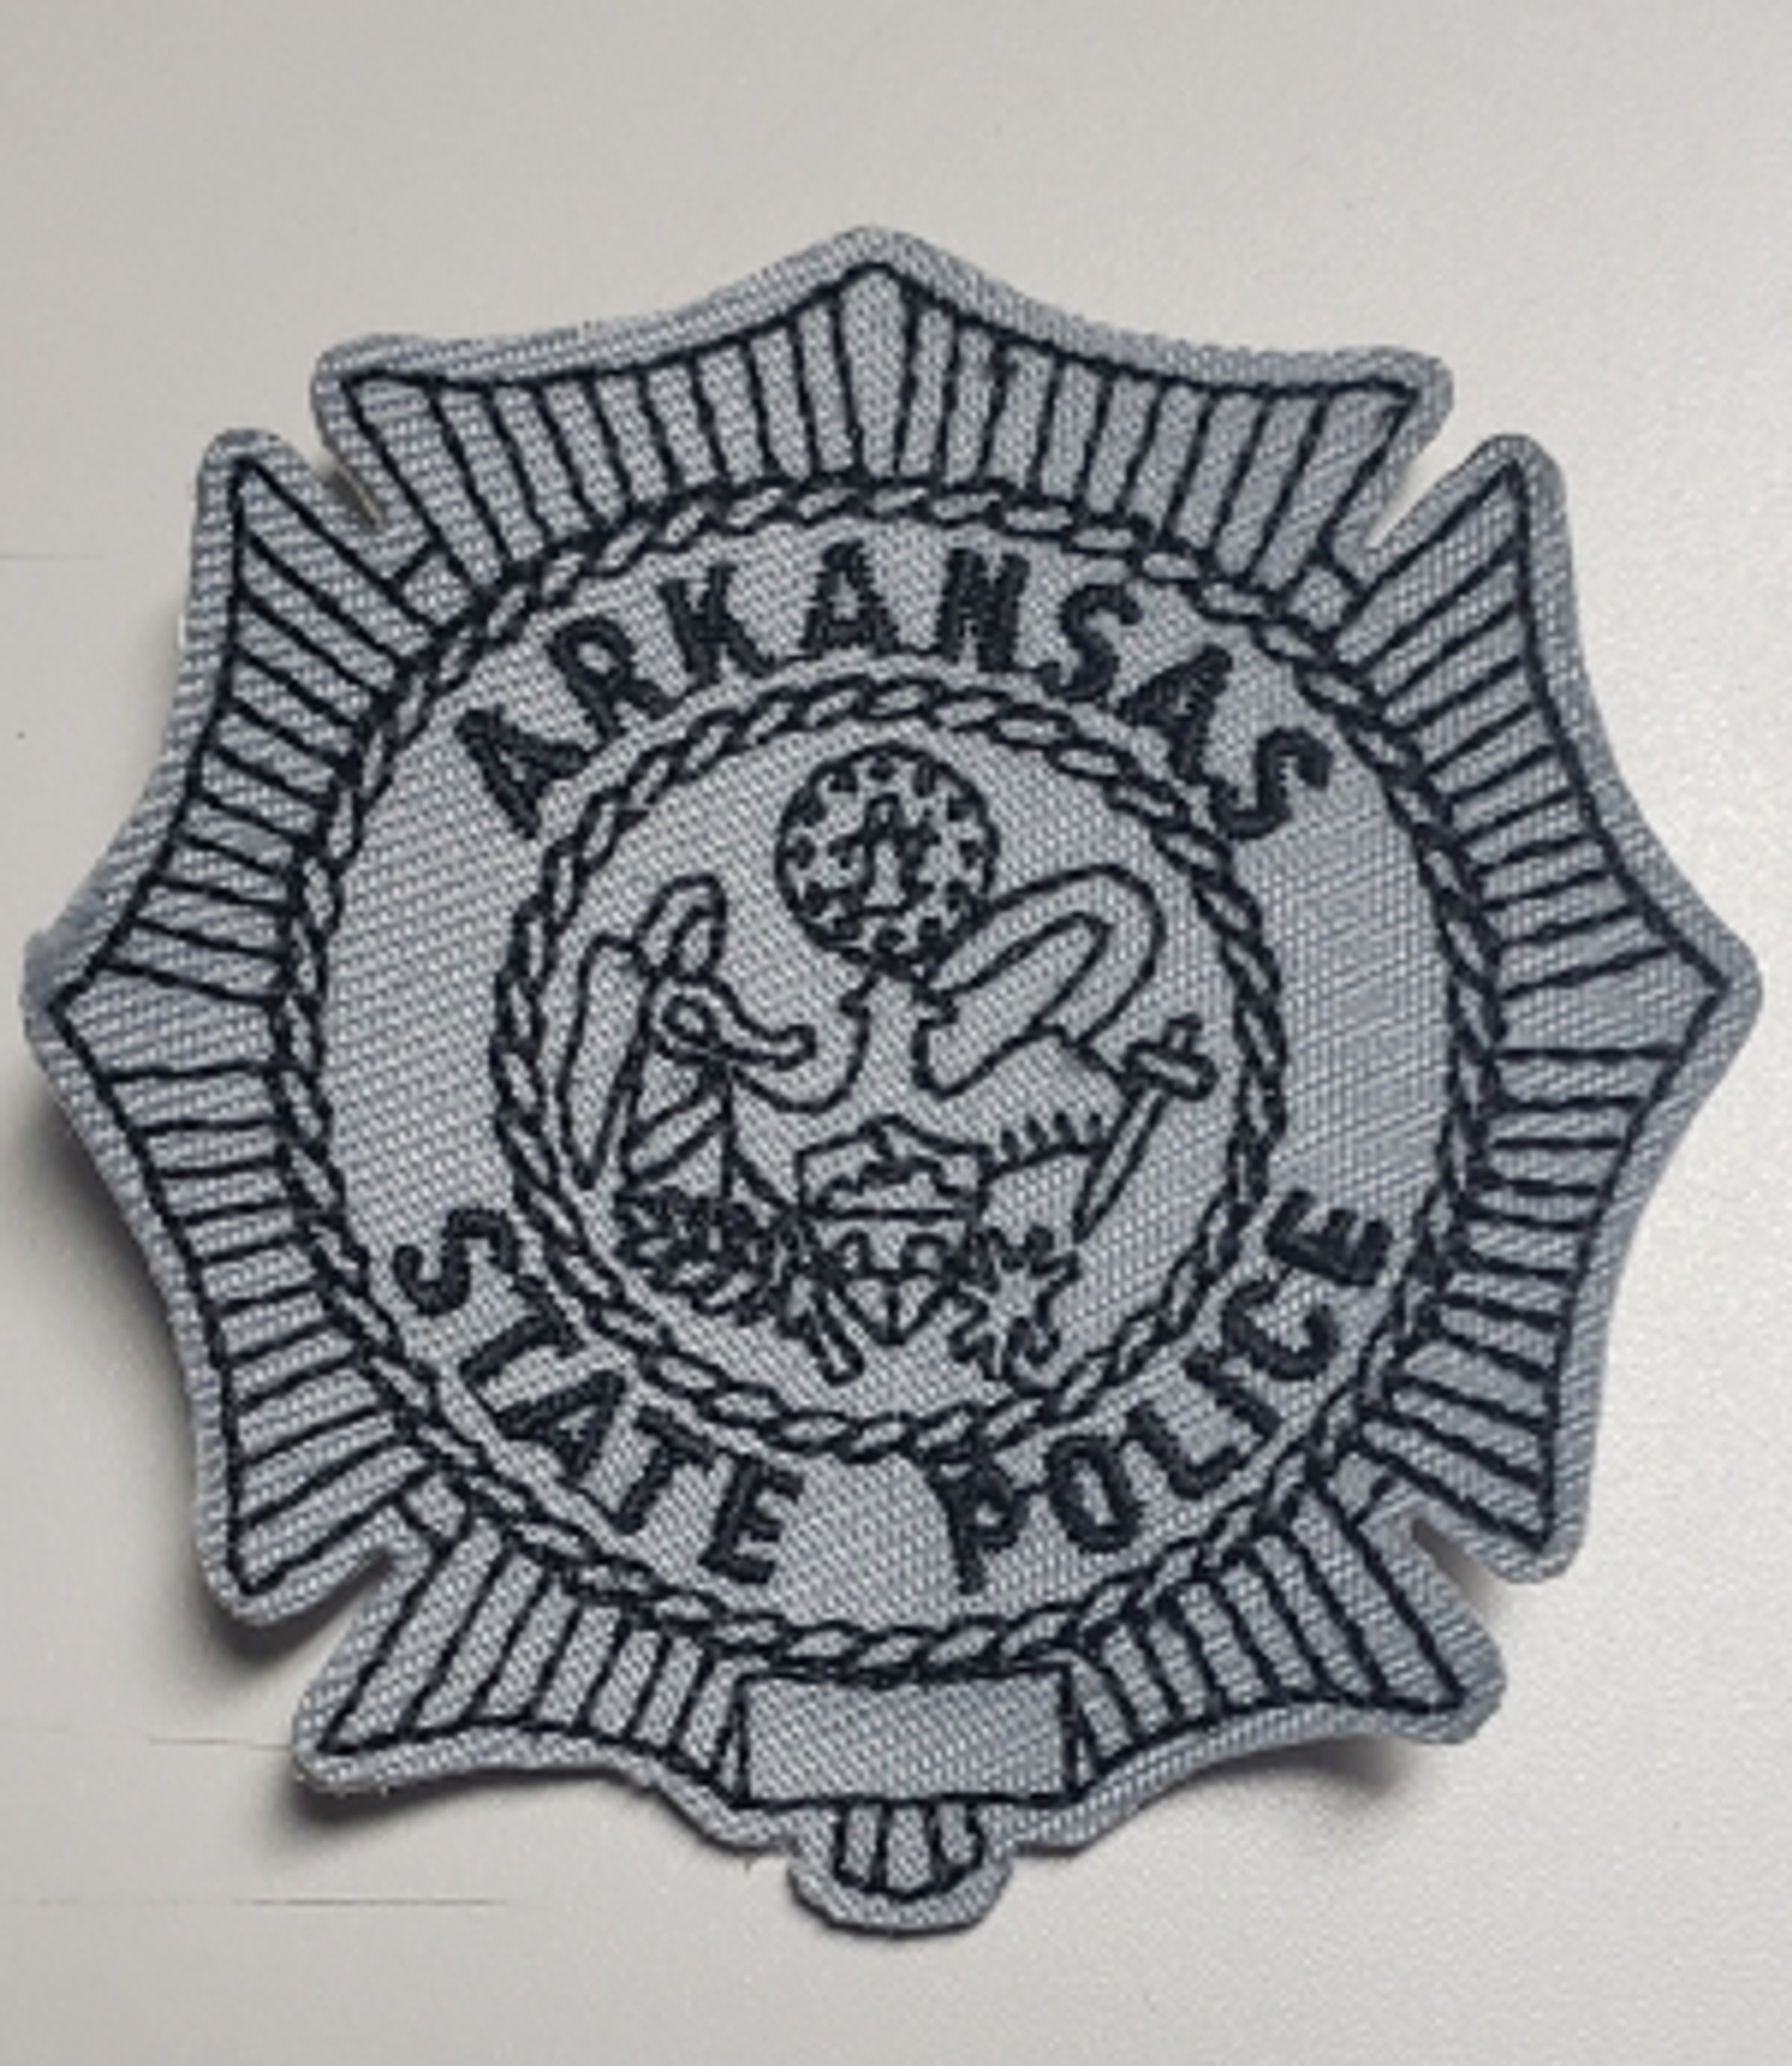 Arkansas State Police Patch